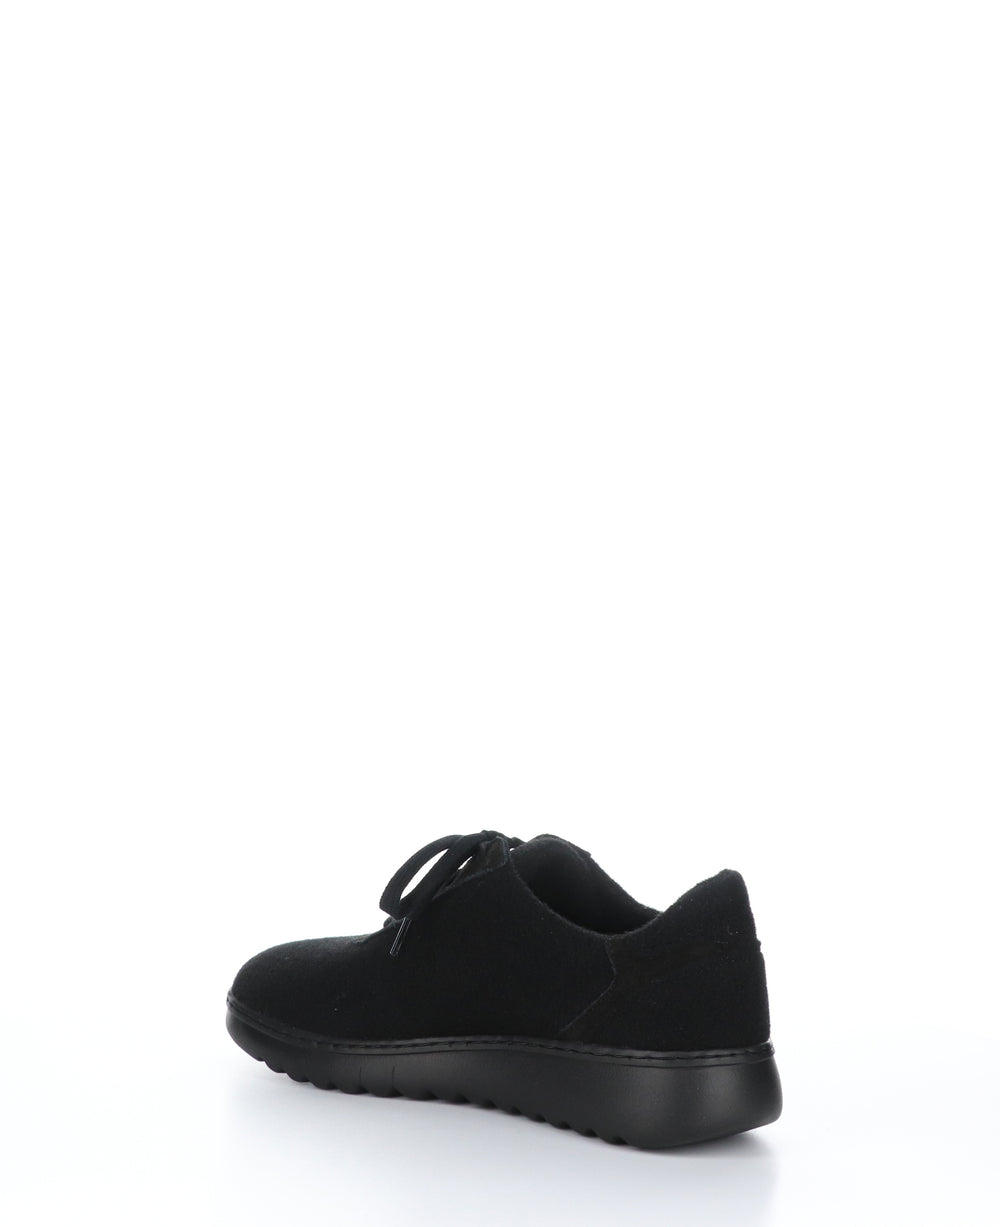 ELRA670SOF Black Round Toe Shoes|ELRA670SOF Chaussures à Bout Rond in Noir